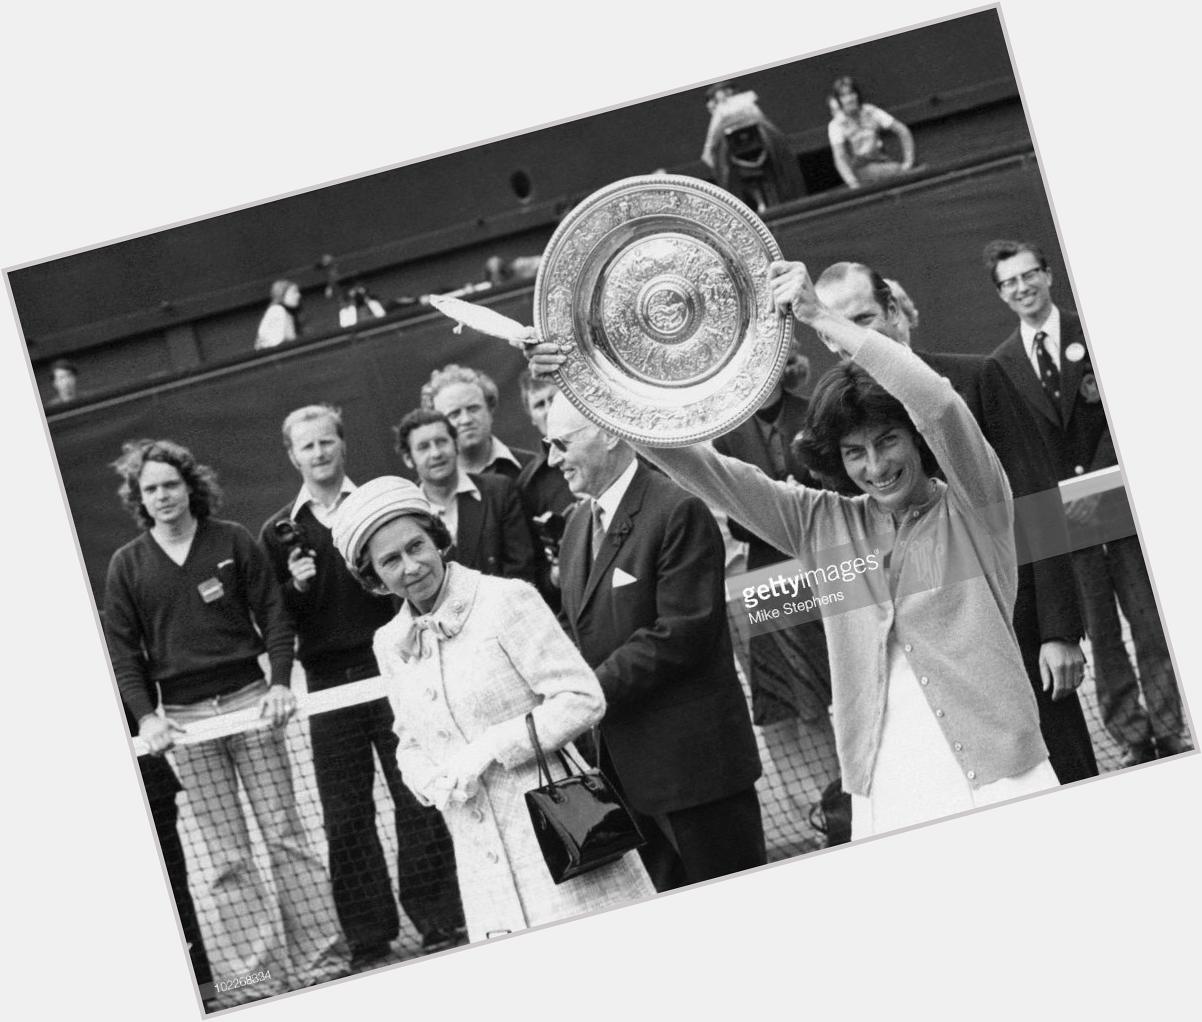 Happy 70th birthday to Virginia Wade, who remains the last British woman to win the singles championship 